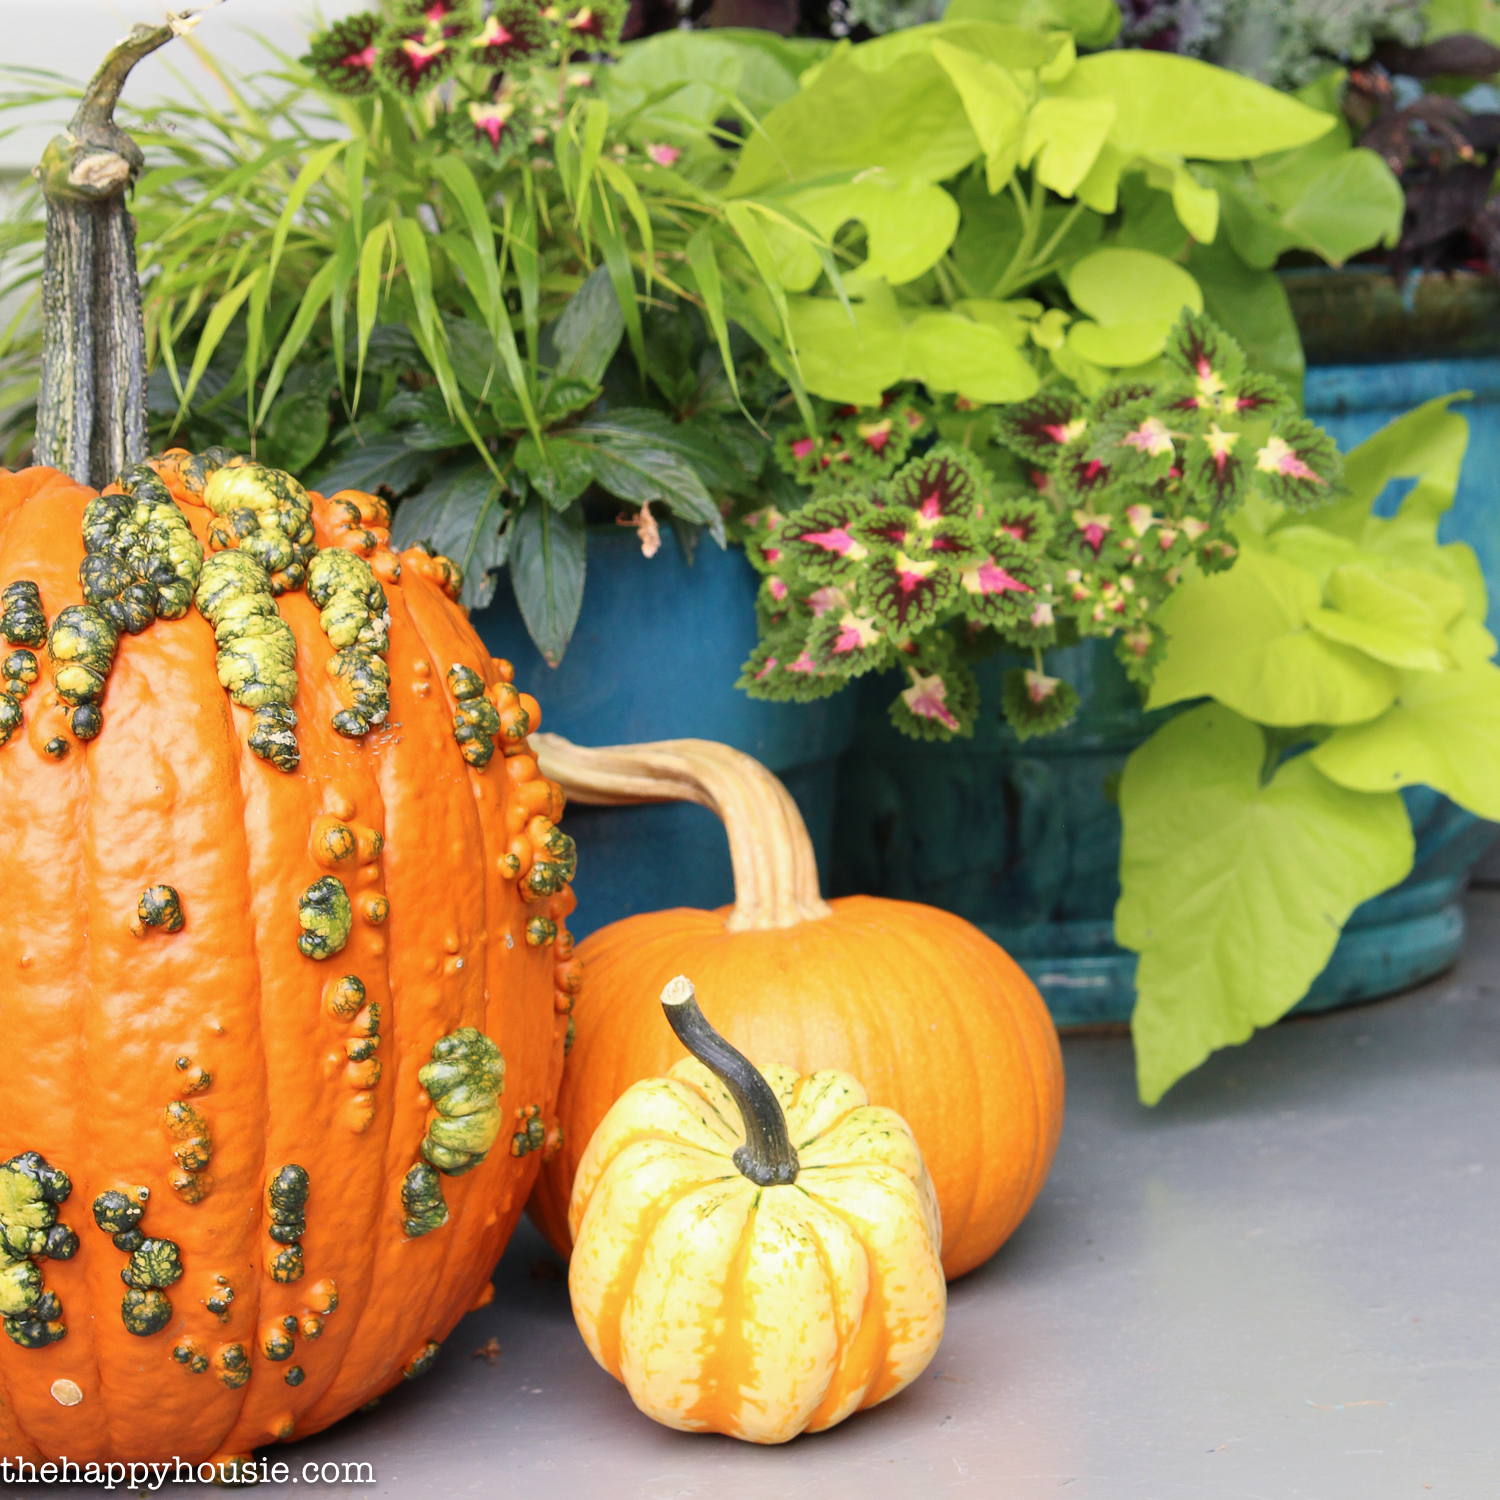 Three pumpkins on the porch beside potted plants.